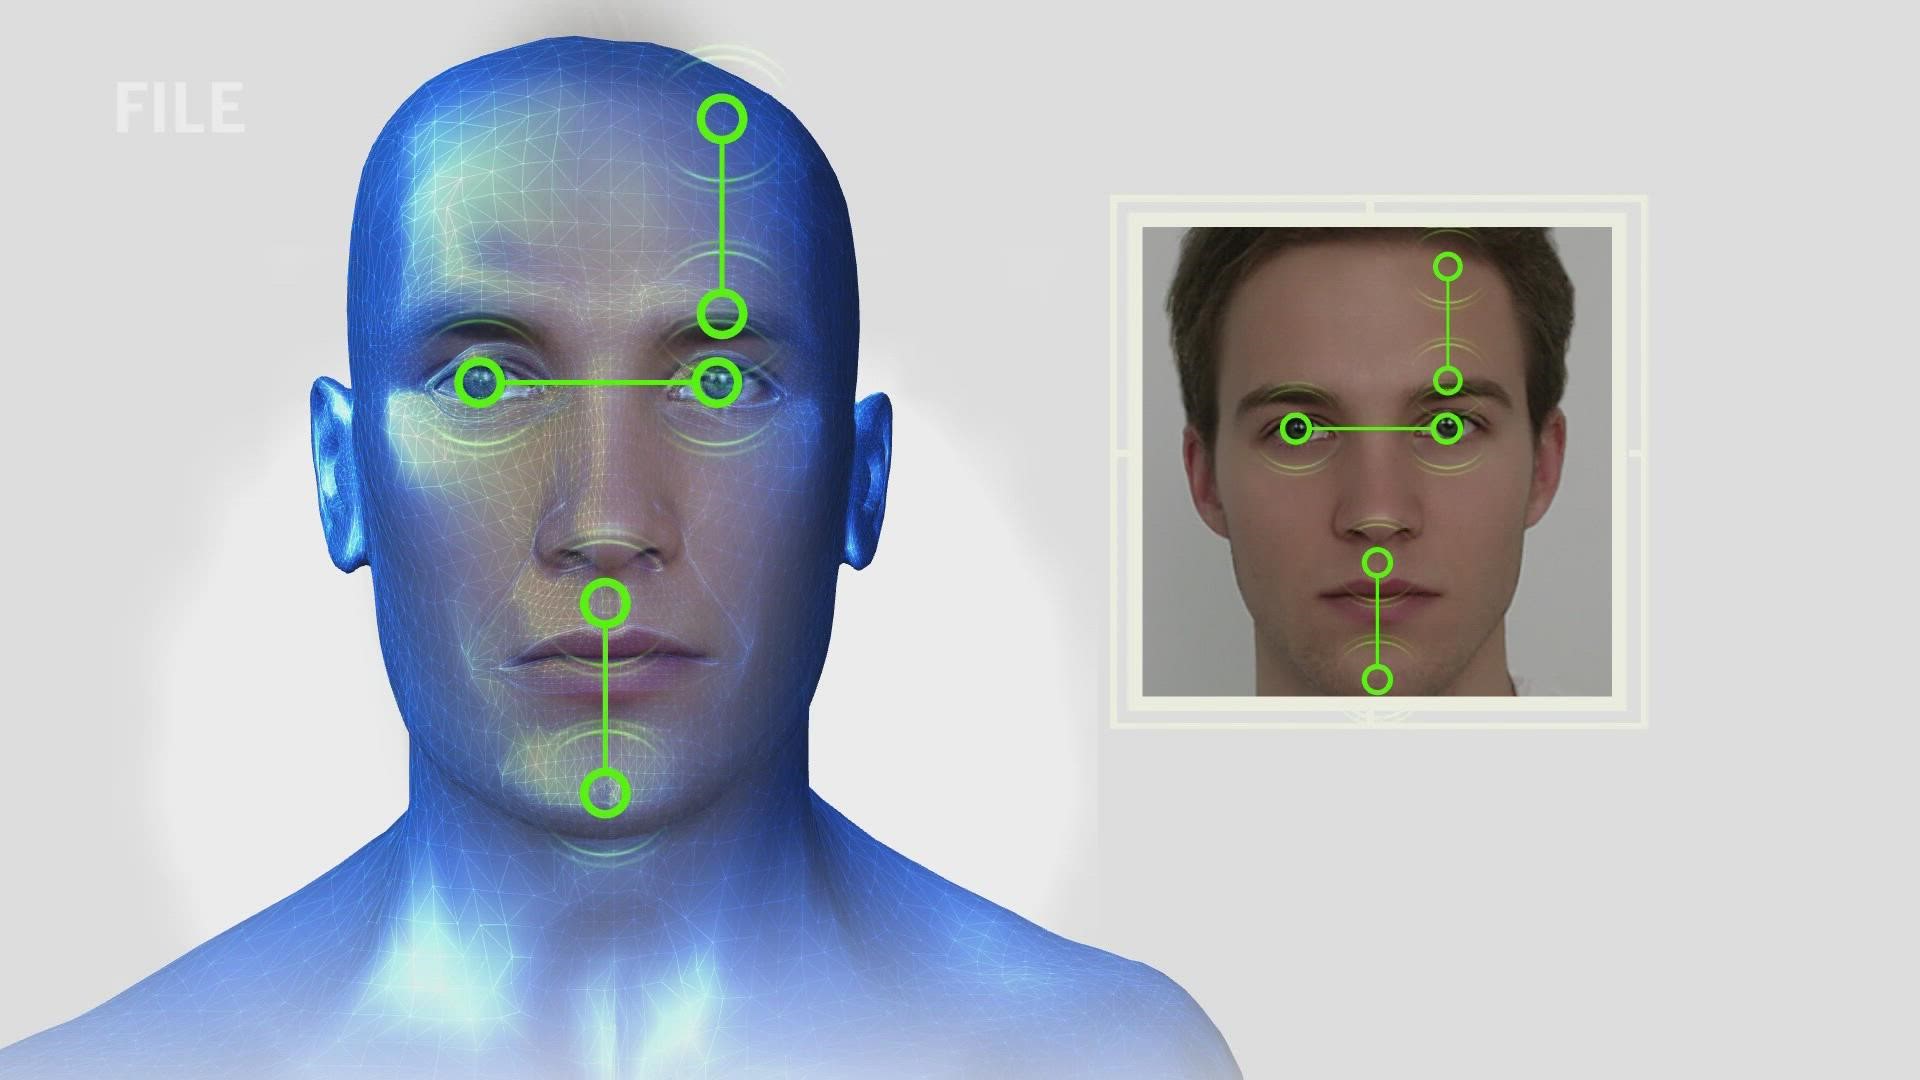 The ACLU, an ardent critic of facial recognition, endorsed the new safeguards.